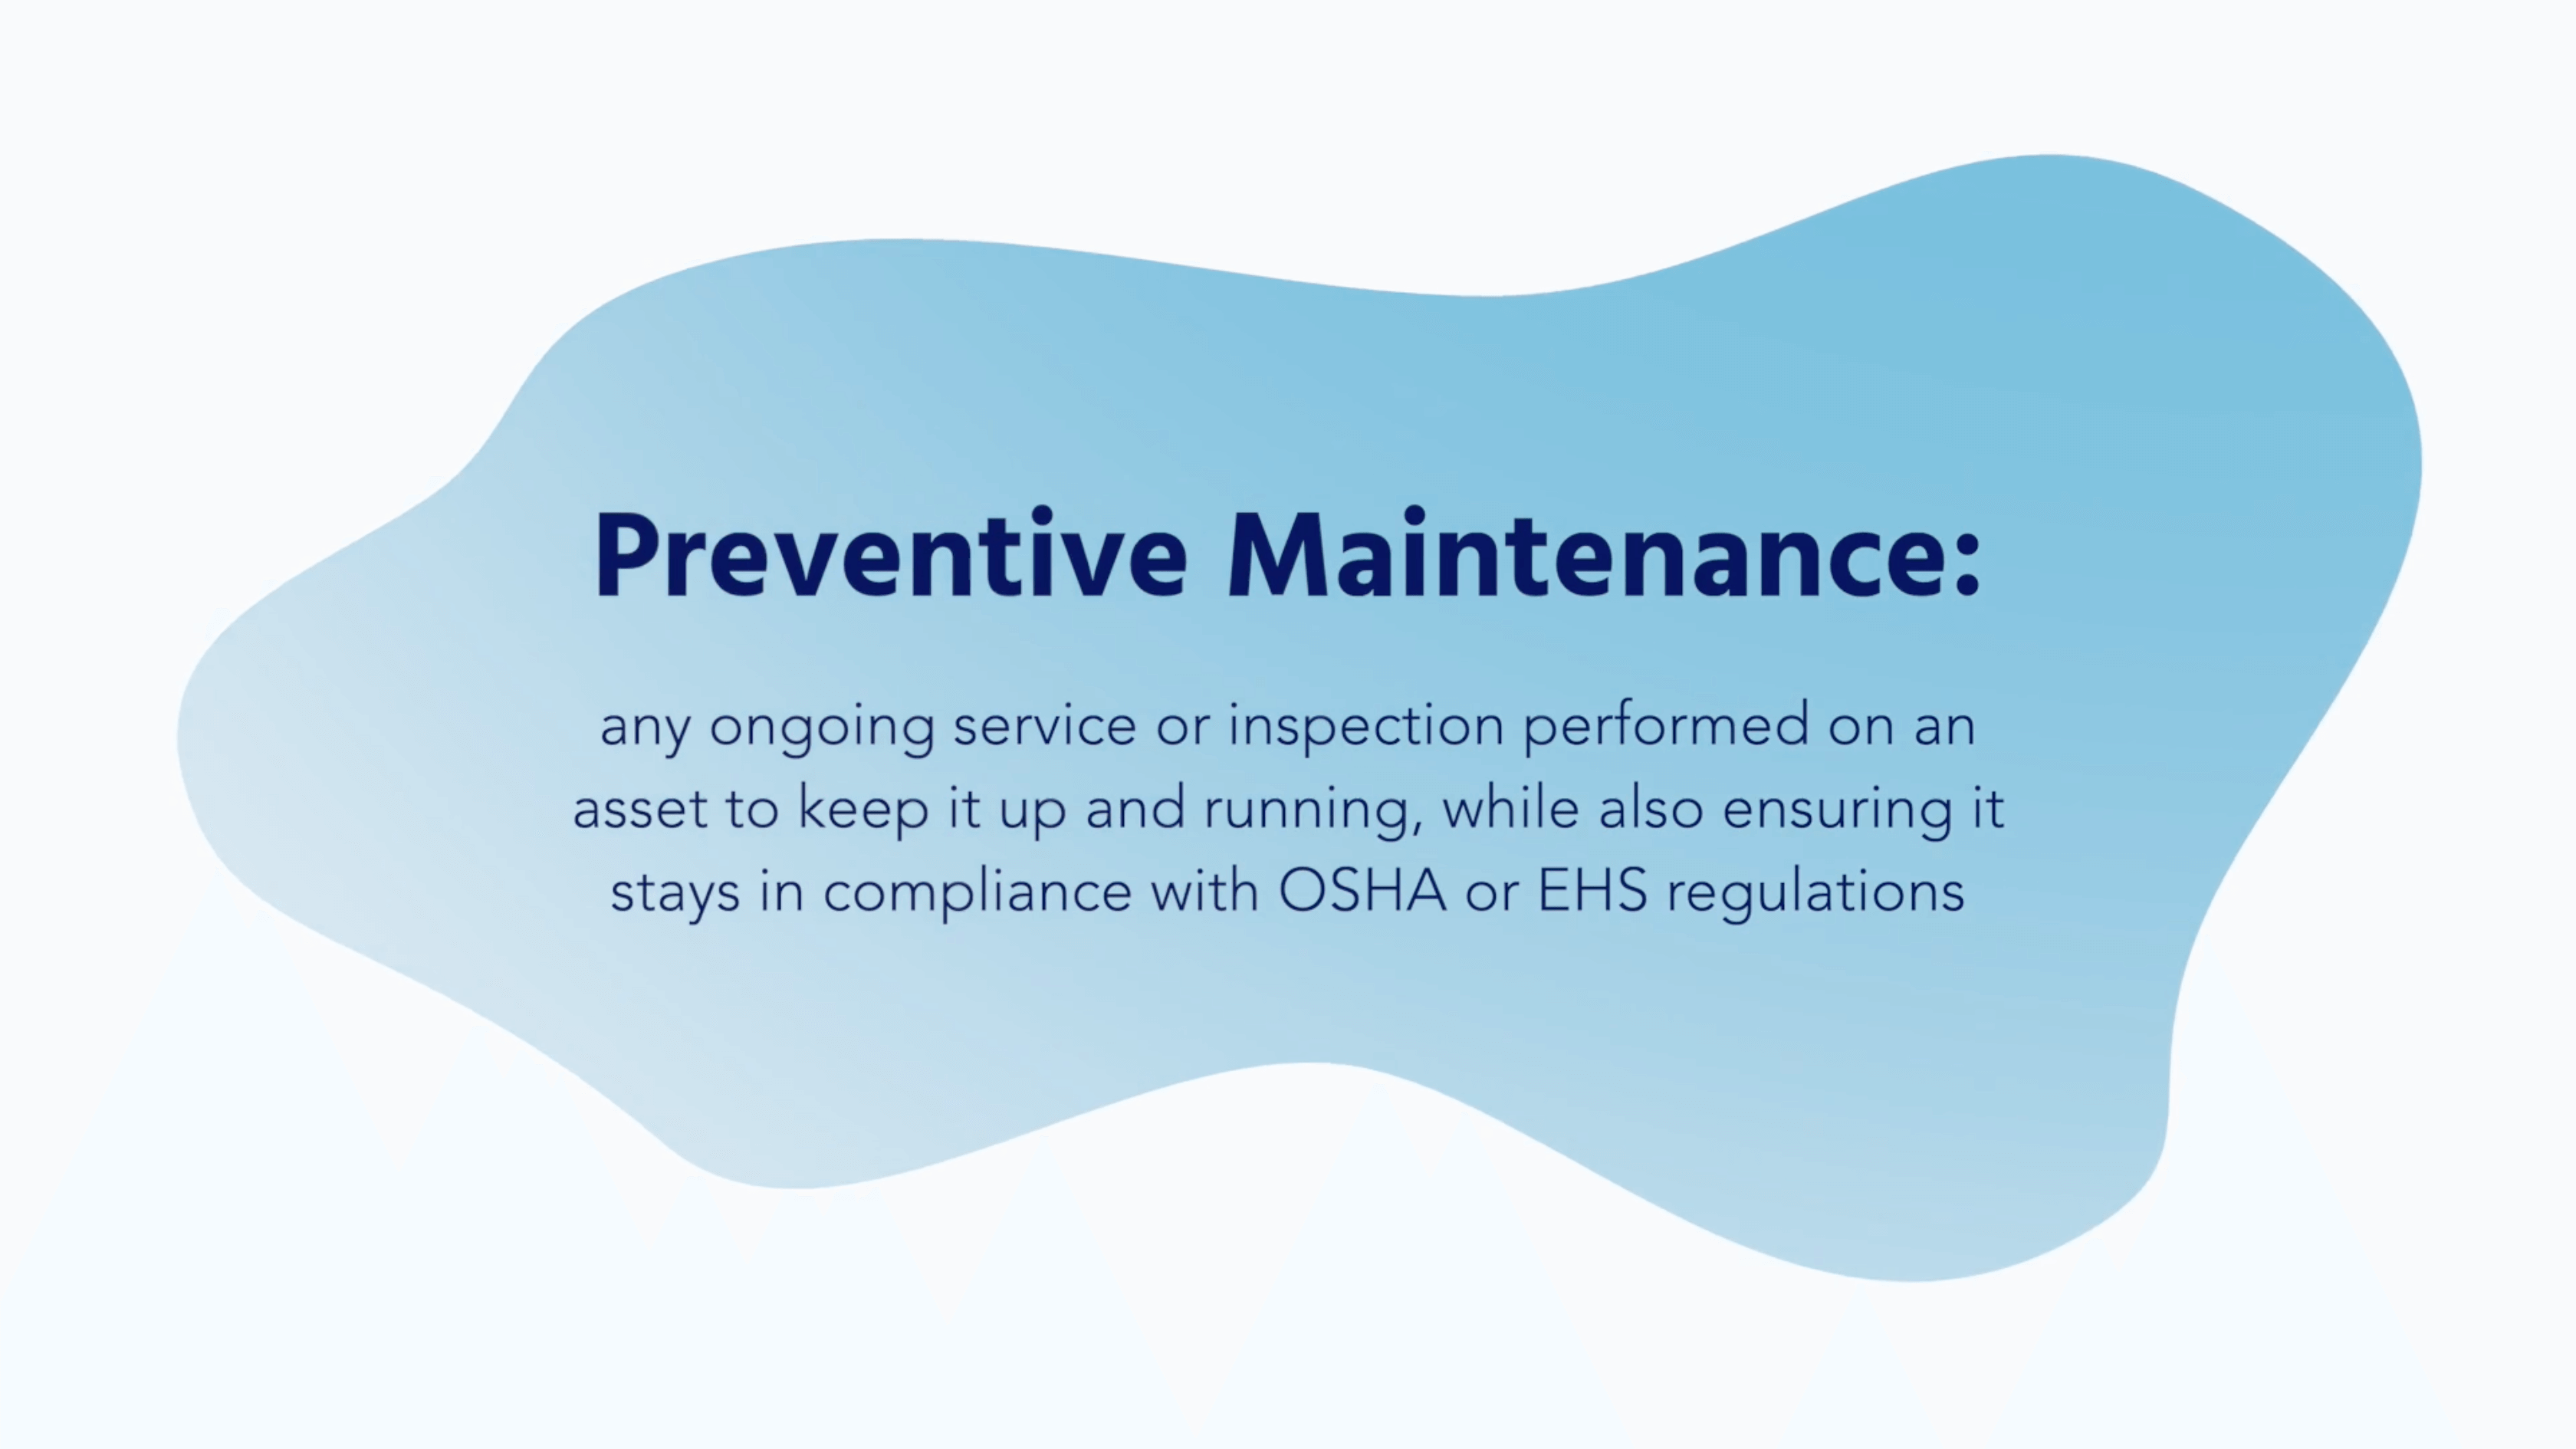 How to maintain preventative maintenance that is efficient and cost-effective